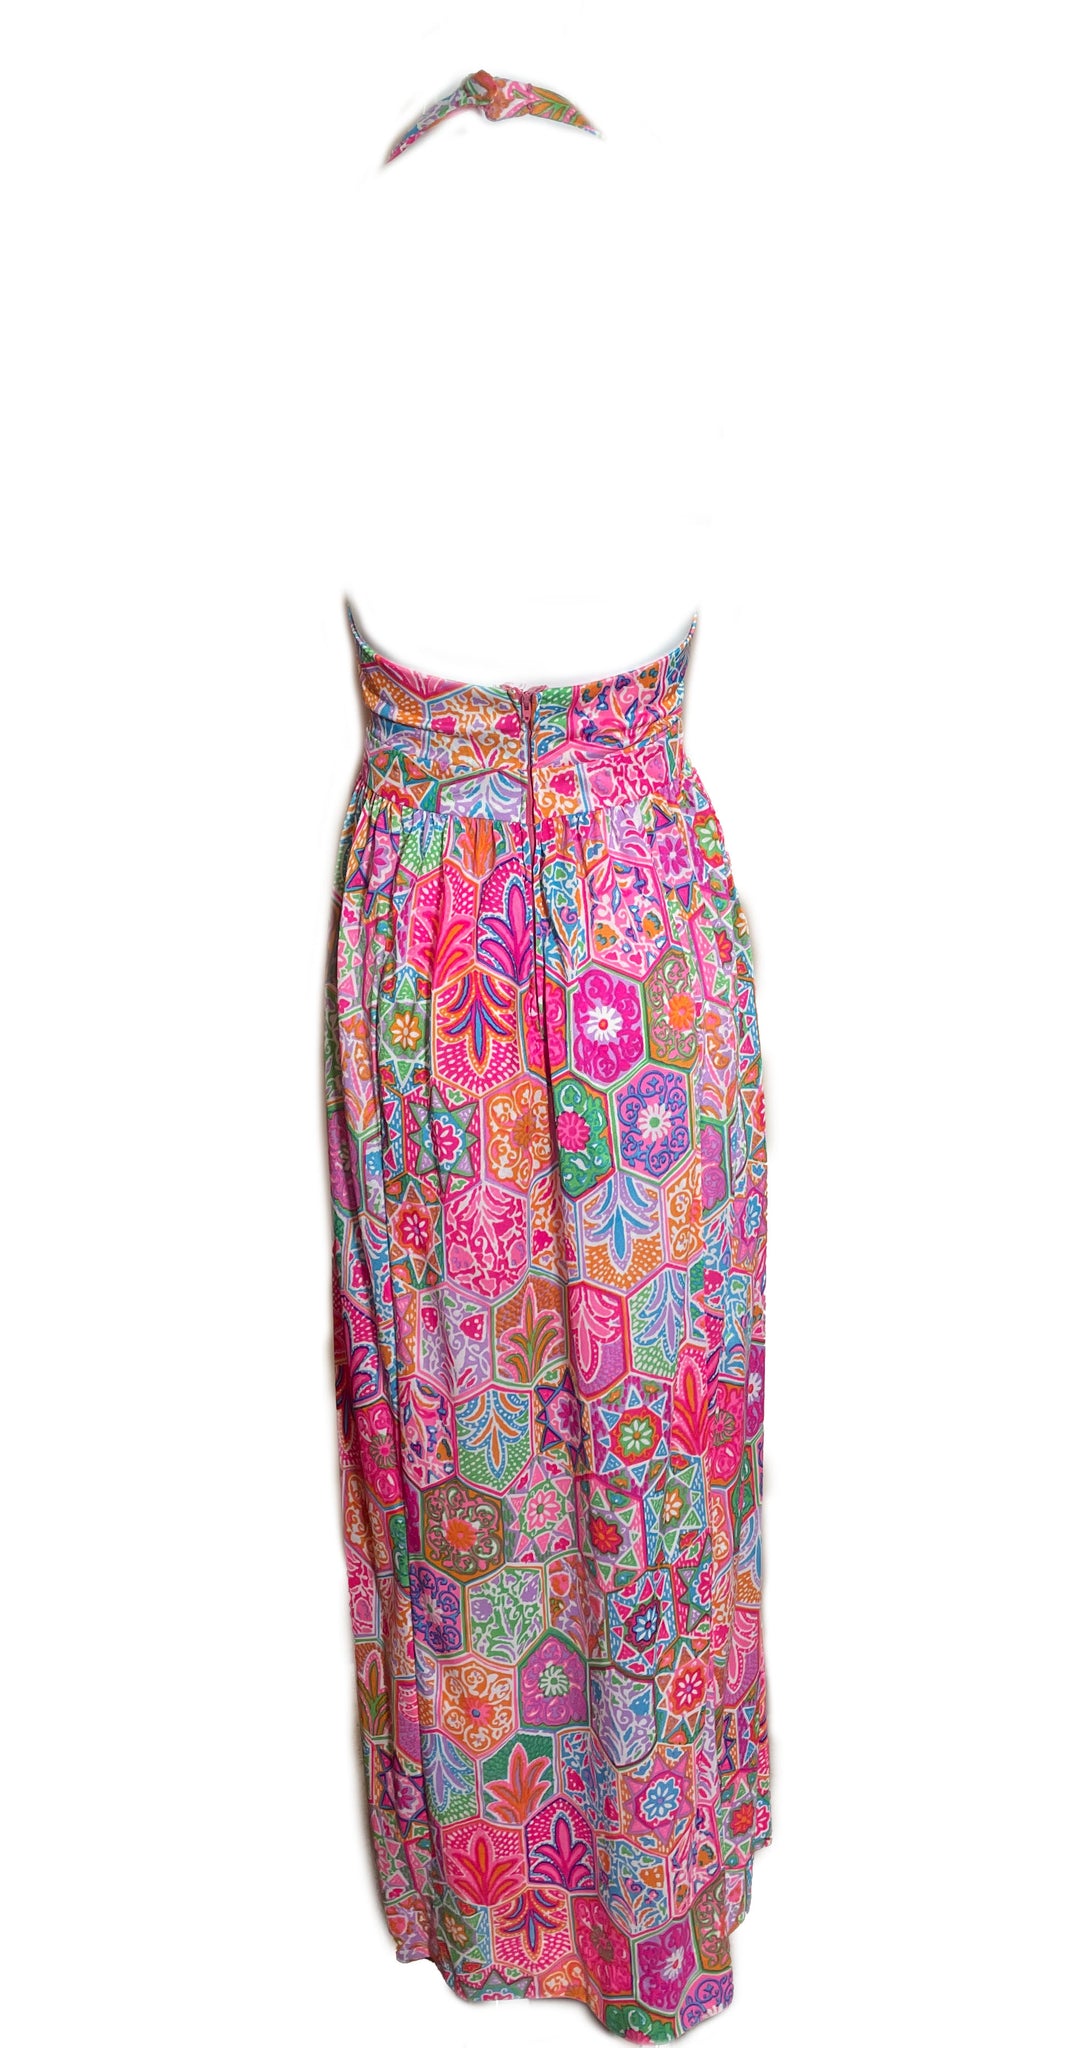  70s Acid Tone Psychedelic Polyester Halter Maxi Dress BACK 3 of 5